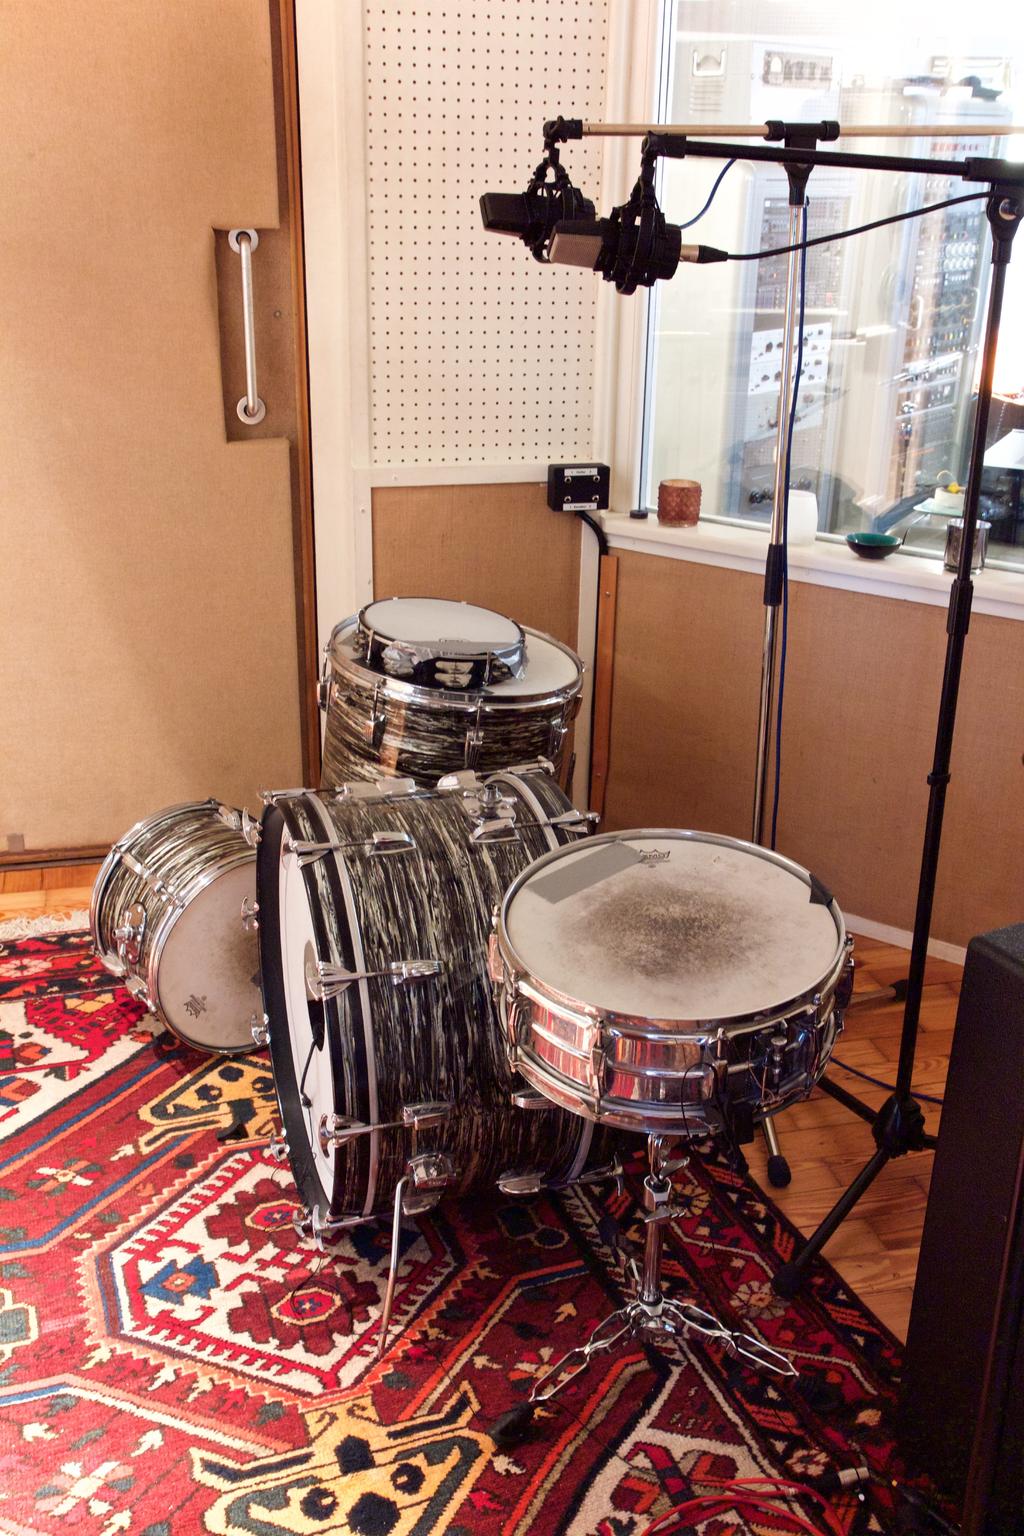 An additional session at SC studios captured more rattle sounds - another drum kit, room rattles, boxes of screws, tins - a selection of small sonic artefacts that could be triggered with drums at a